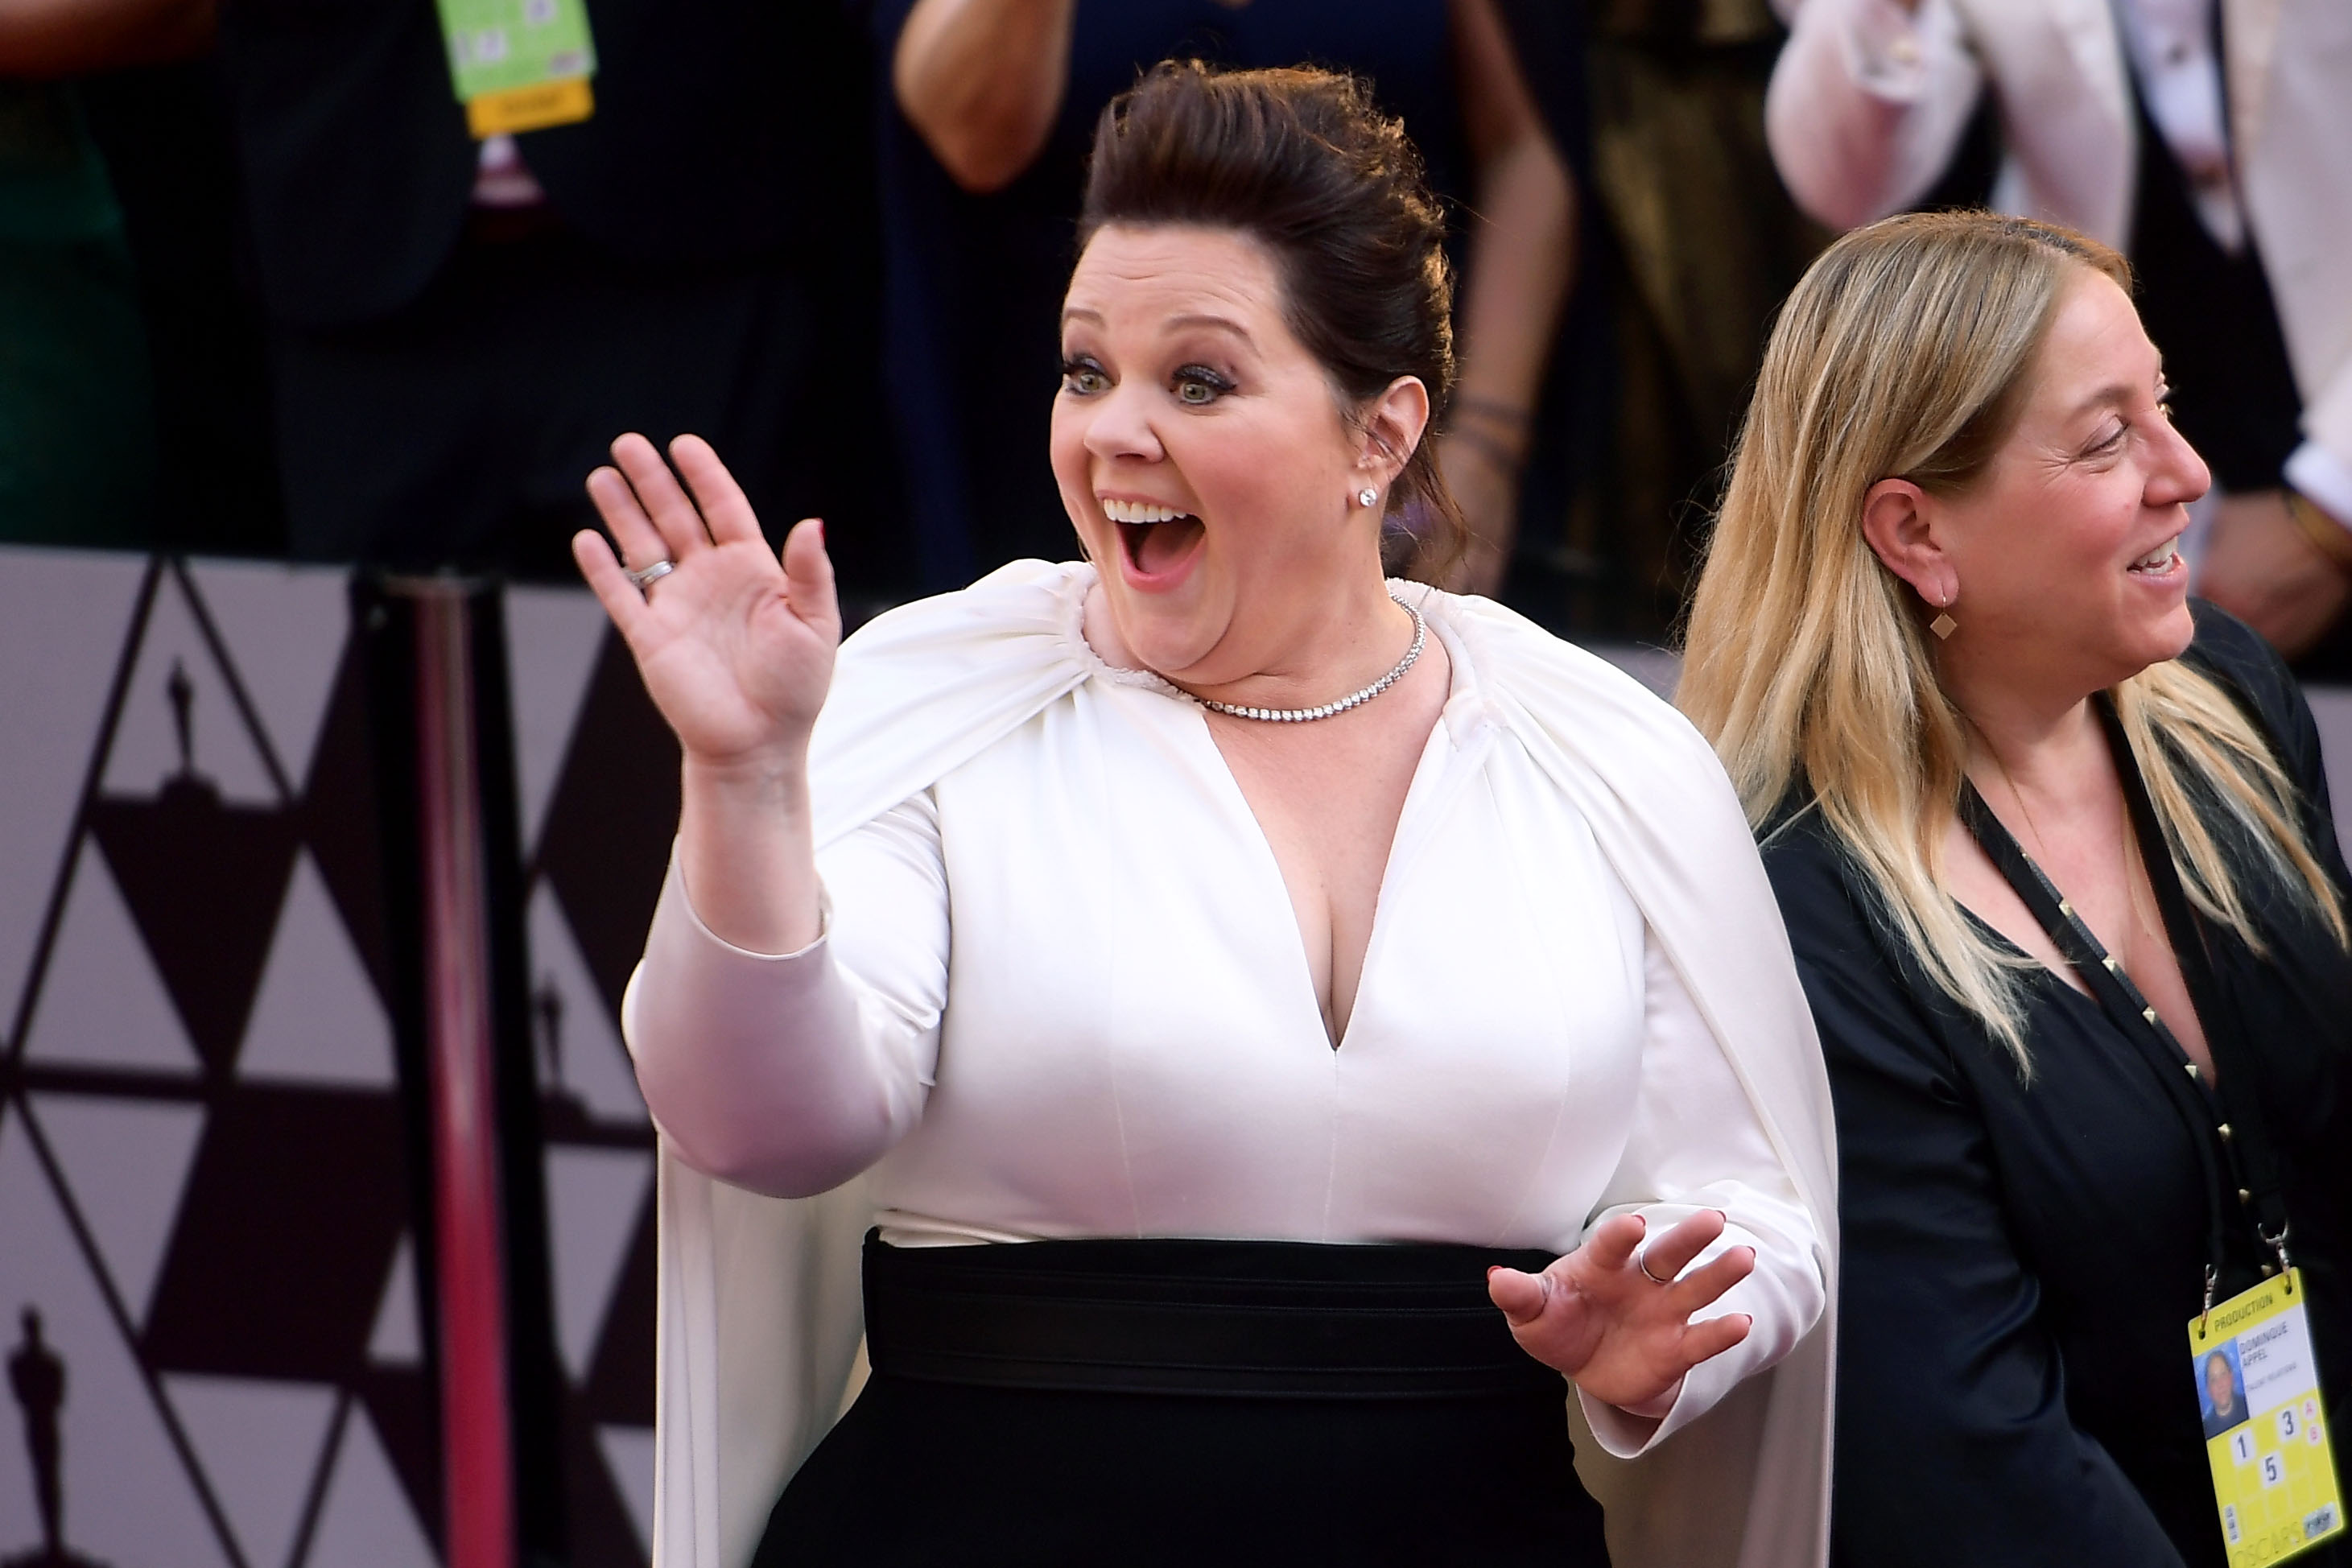 Melissa McCarthy To Play “Ursula” In Live-Action “Little Mermaid” Movie: Report